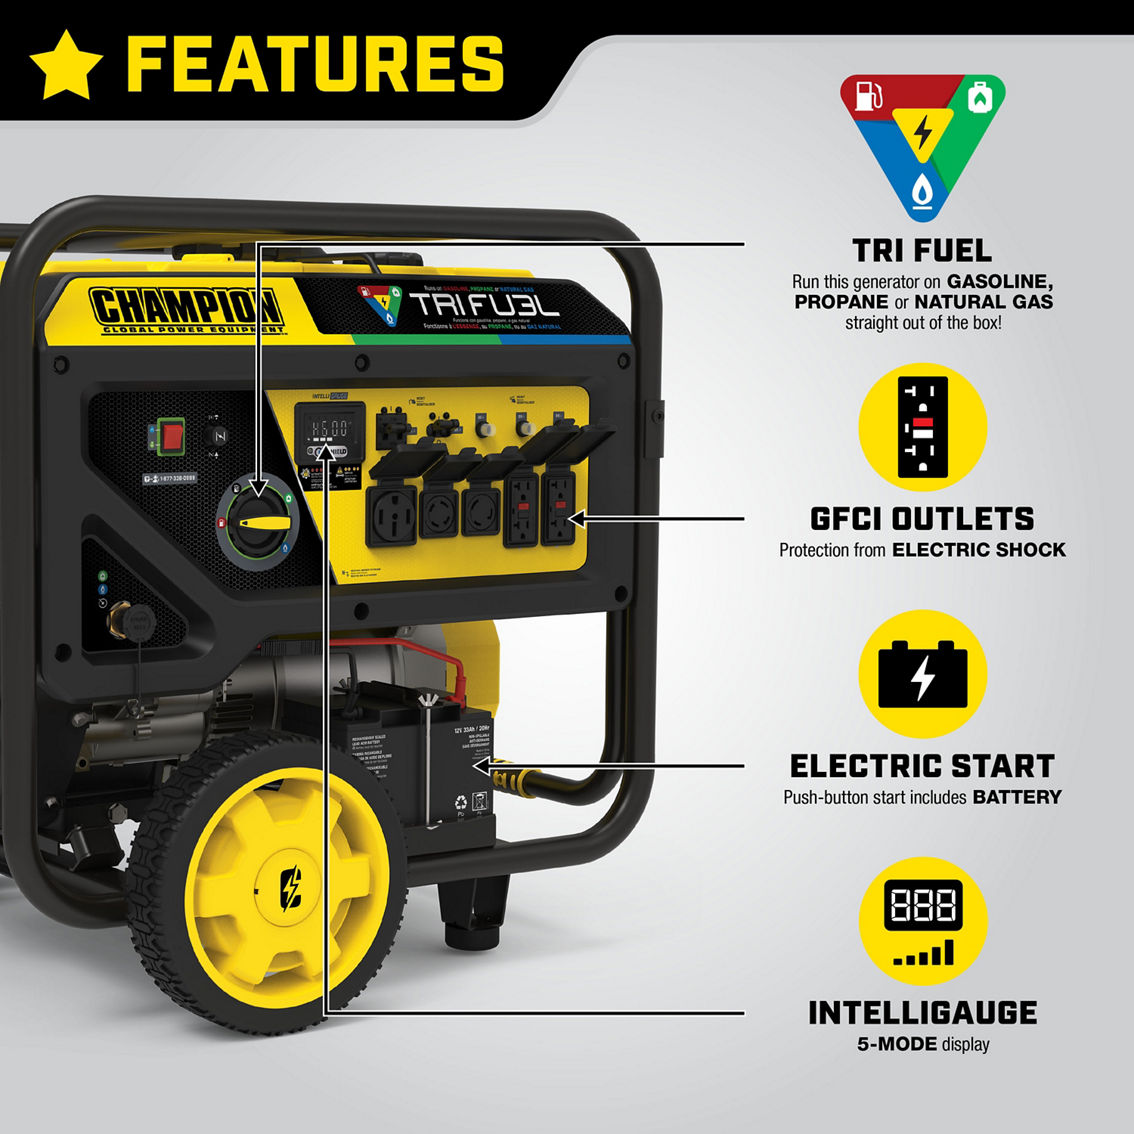 Champion 12,000W Tri Fuel Portable Generator with Electric Start and CO Shield - Image 9 of 10